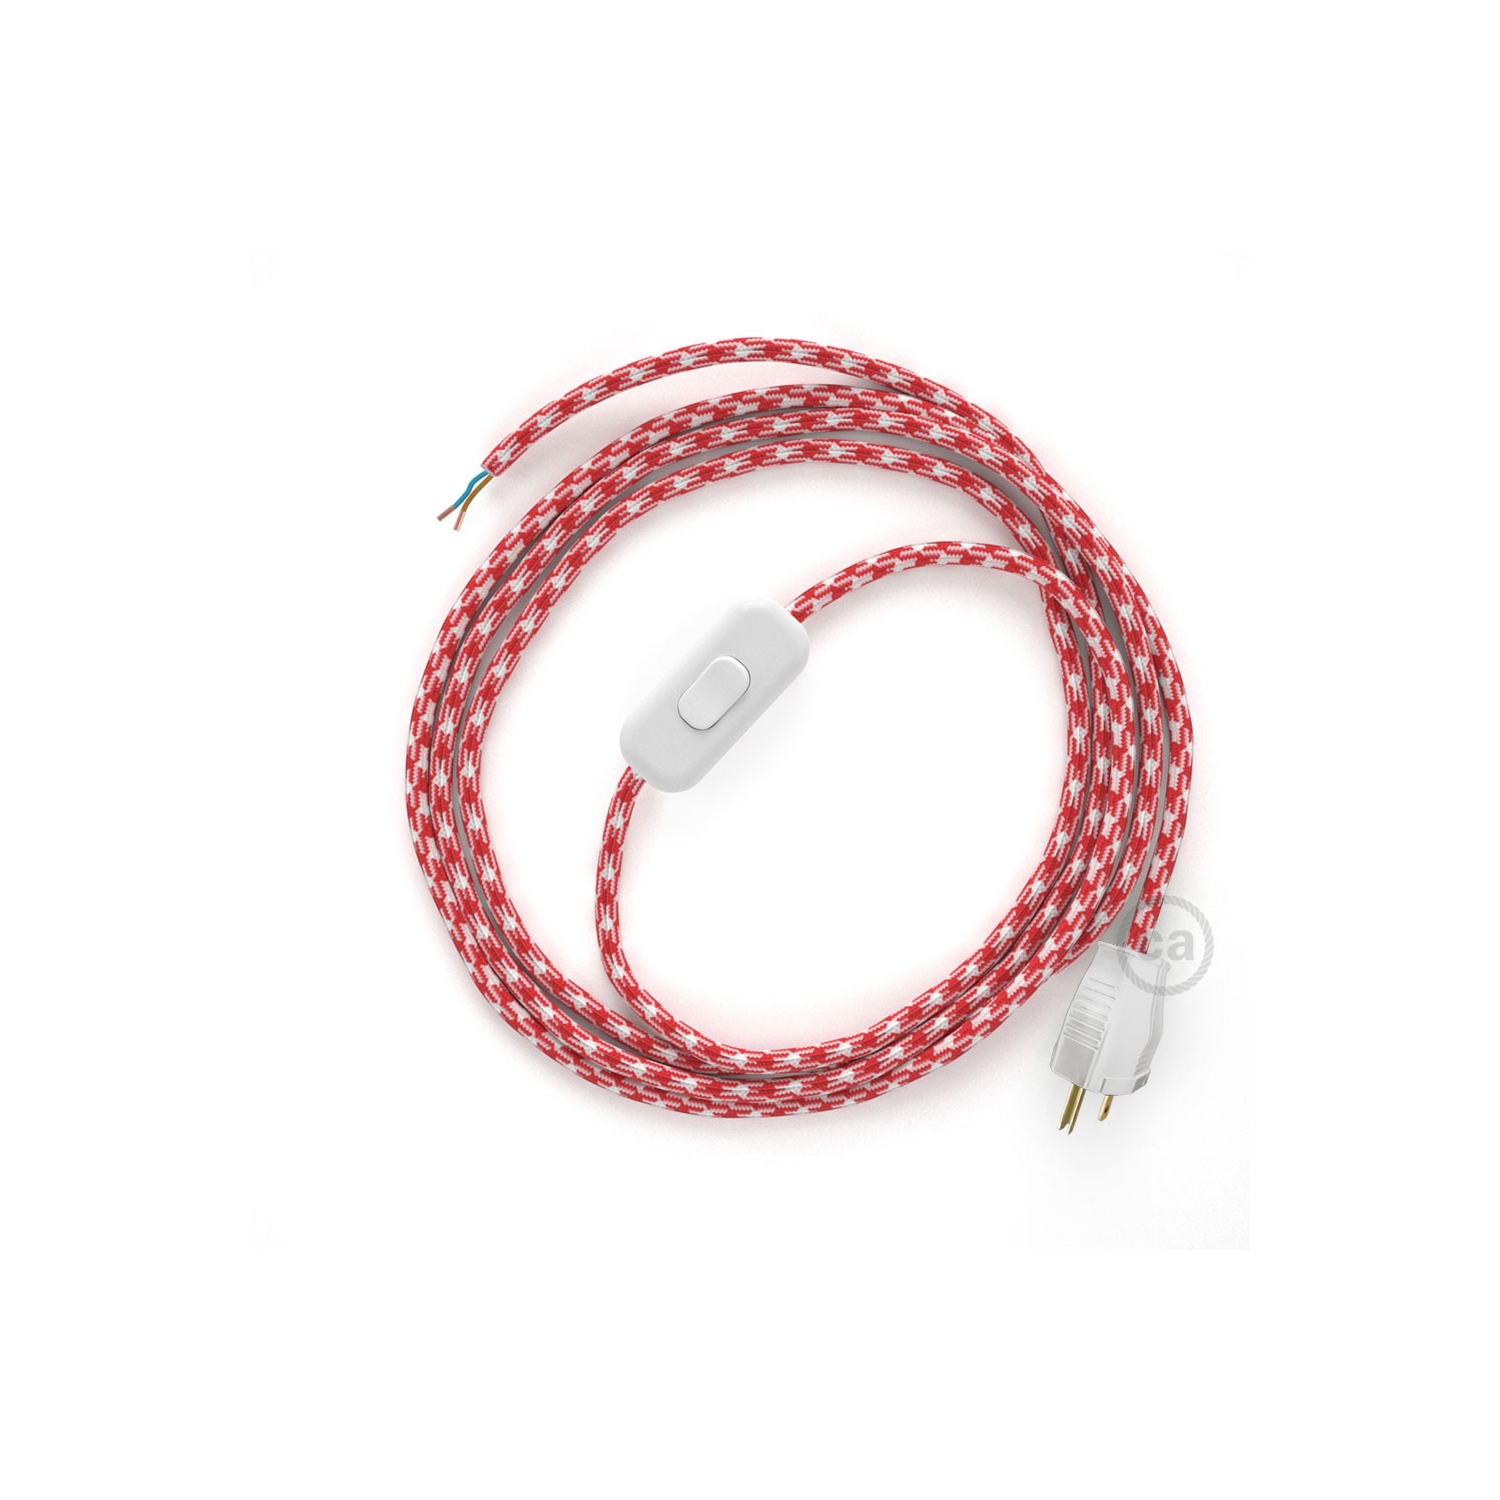 Power Cord with in-line switch, RP09 Red & White Houndstooth - Choose color of switch/plug